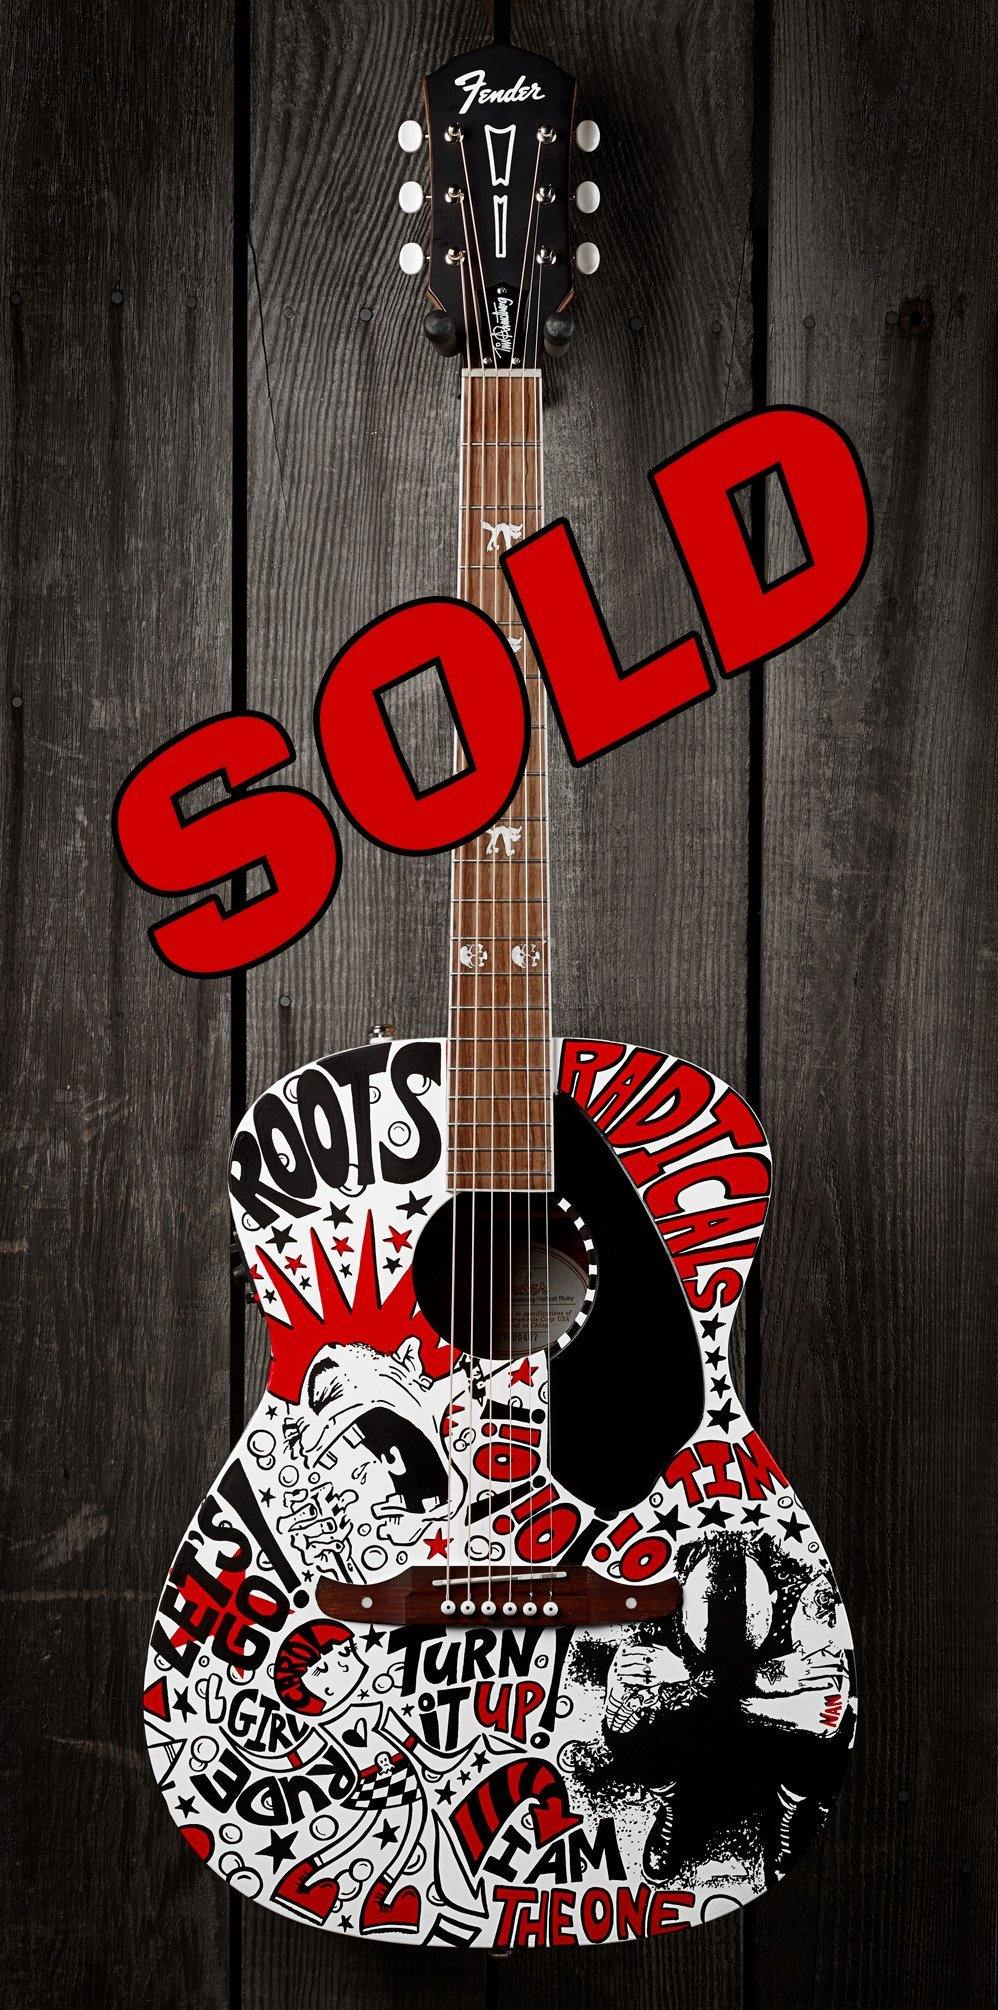 Let's Go! Rancid Guitar | Fine Art and Limited Edition Prints | The Art Of Nan Coffey